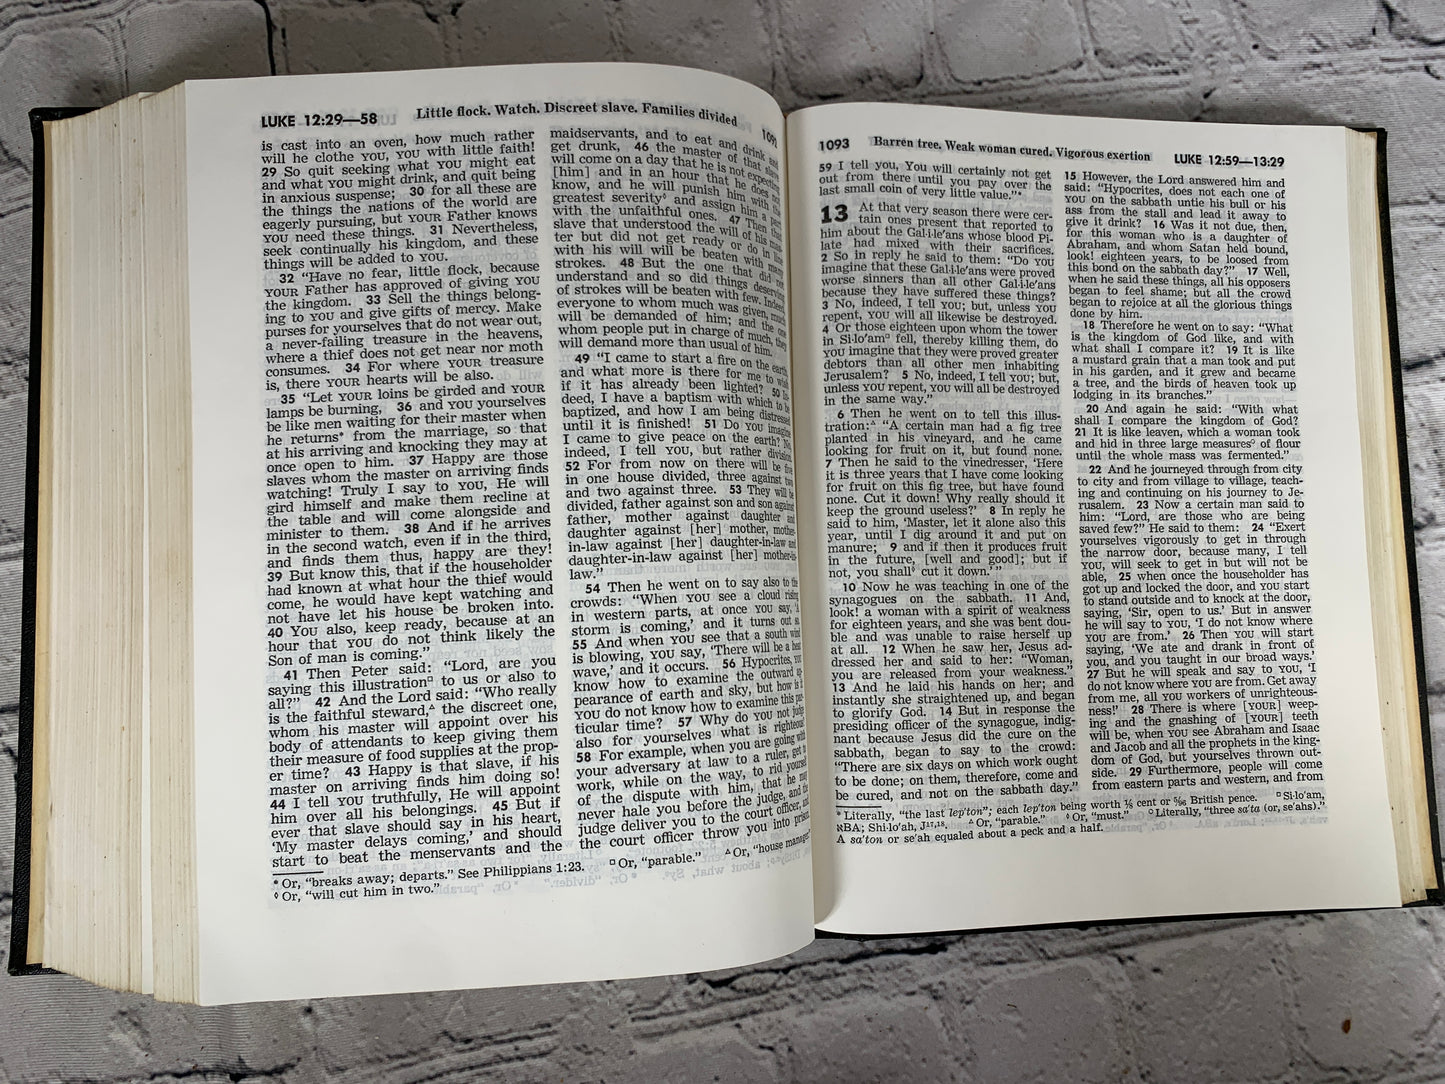 New World Translation of the Holy Scriptures [1978]